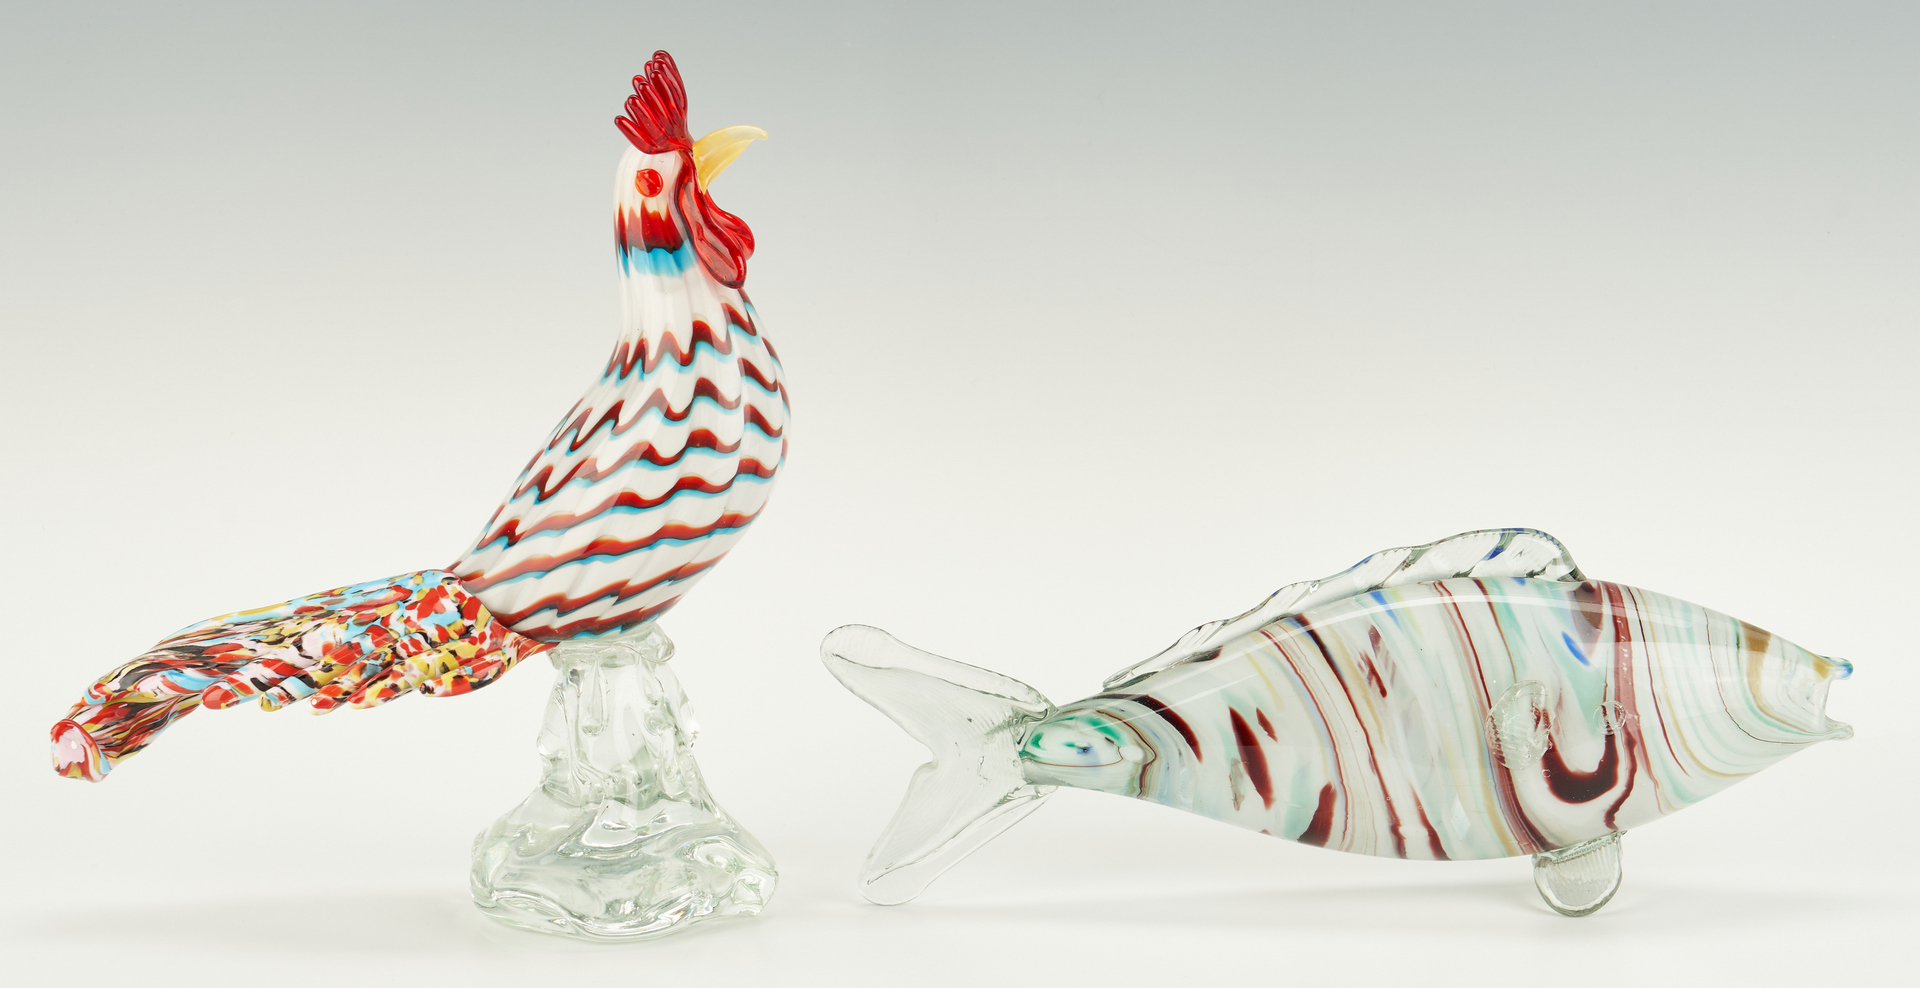 Lot 873: Murano Glass Aquarium, Rooster and Fish